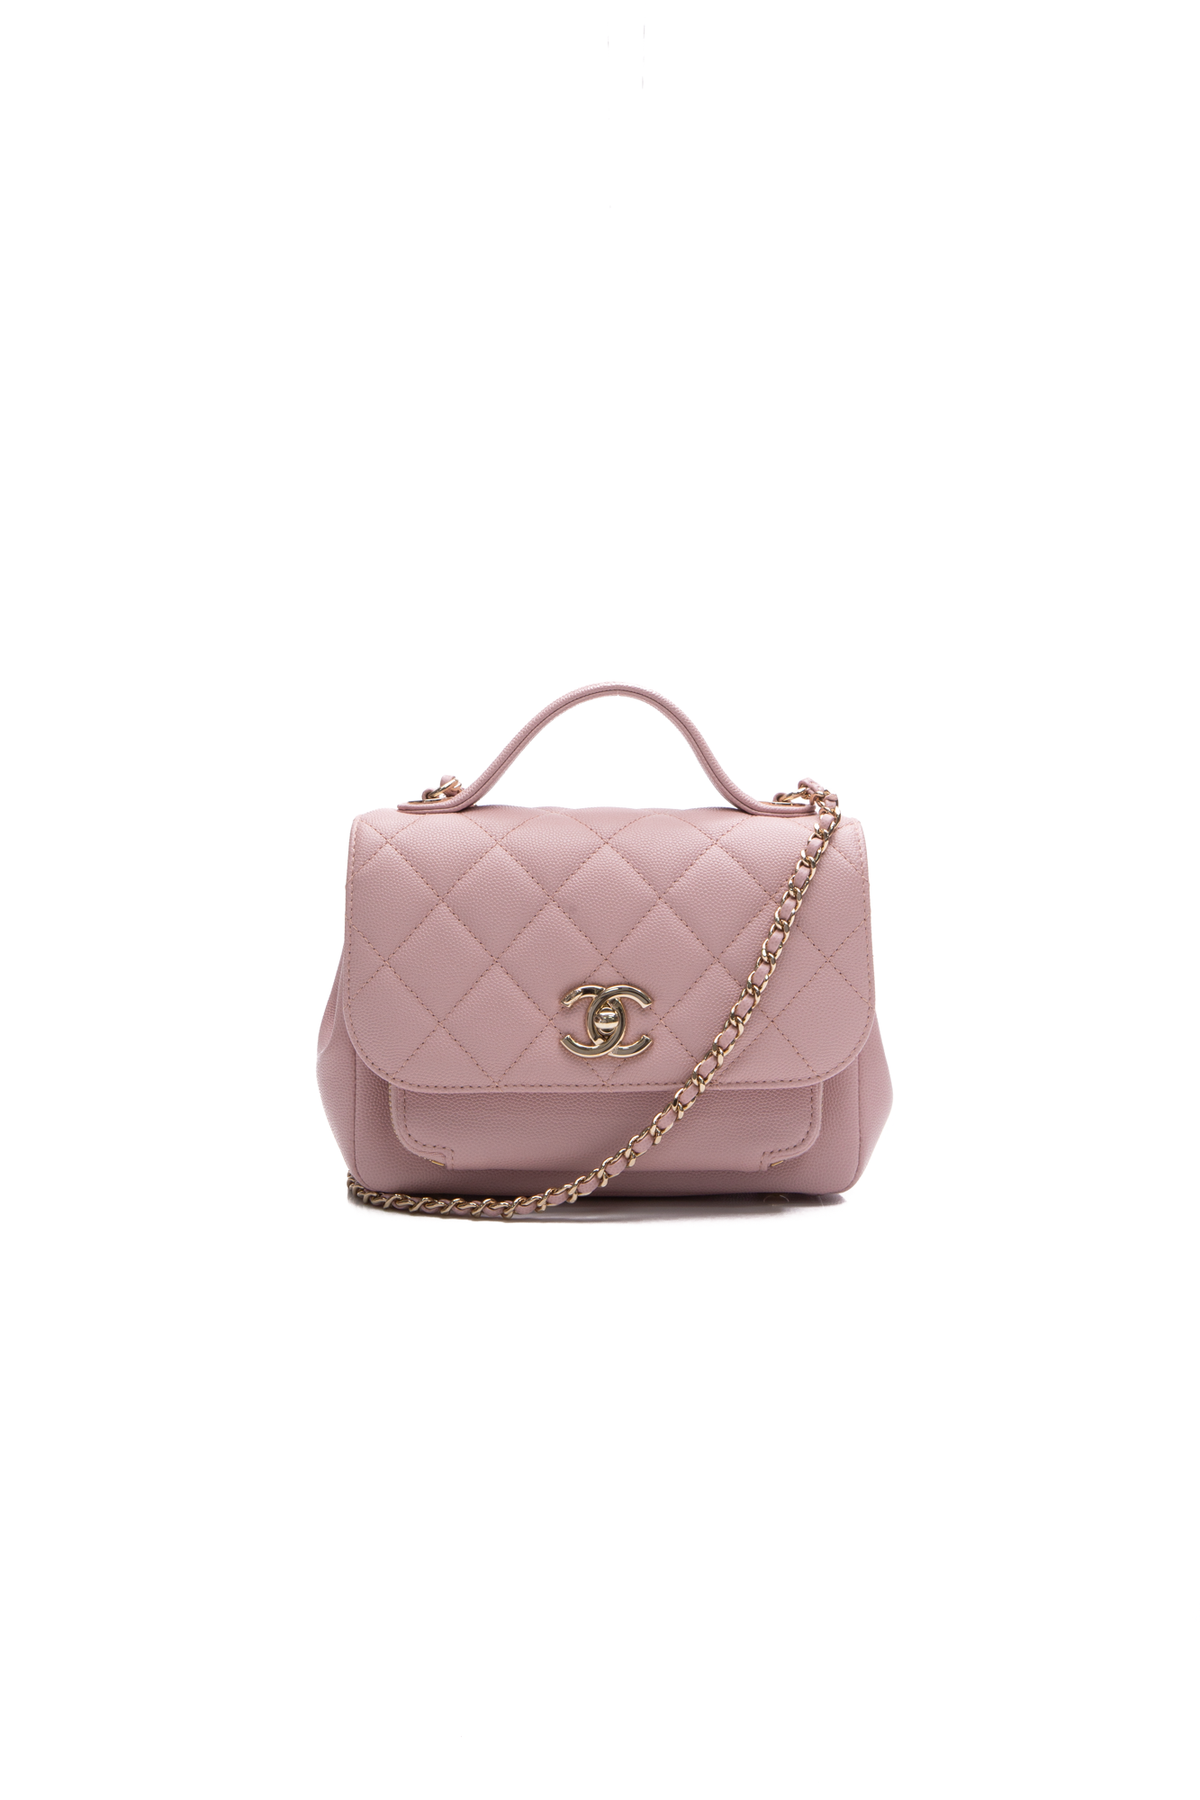 Chanel Caviar Quilted Small Business Affinity Flap Light Pink